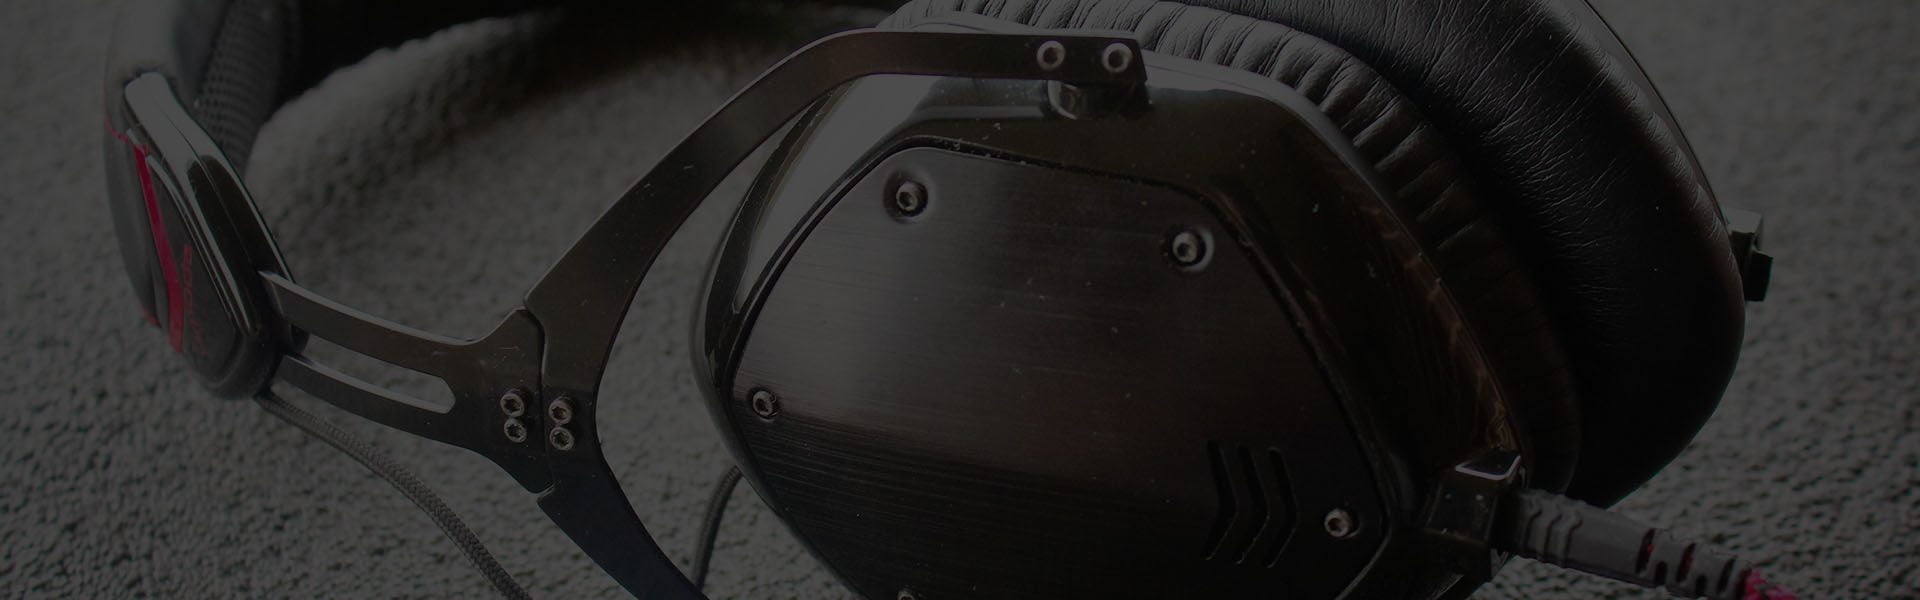 V-MODA: M-100, a Robust Headphone with Cutting-edge Features 14